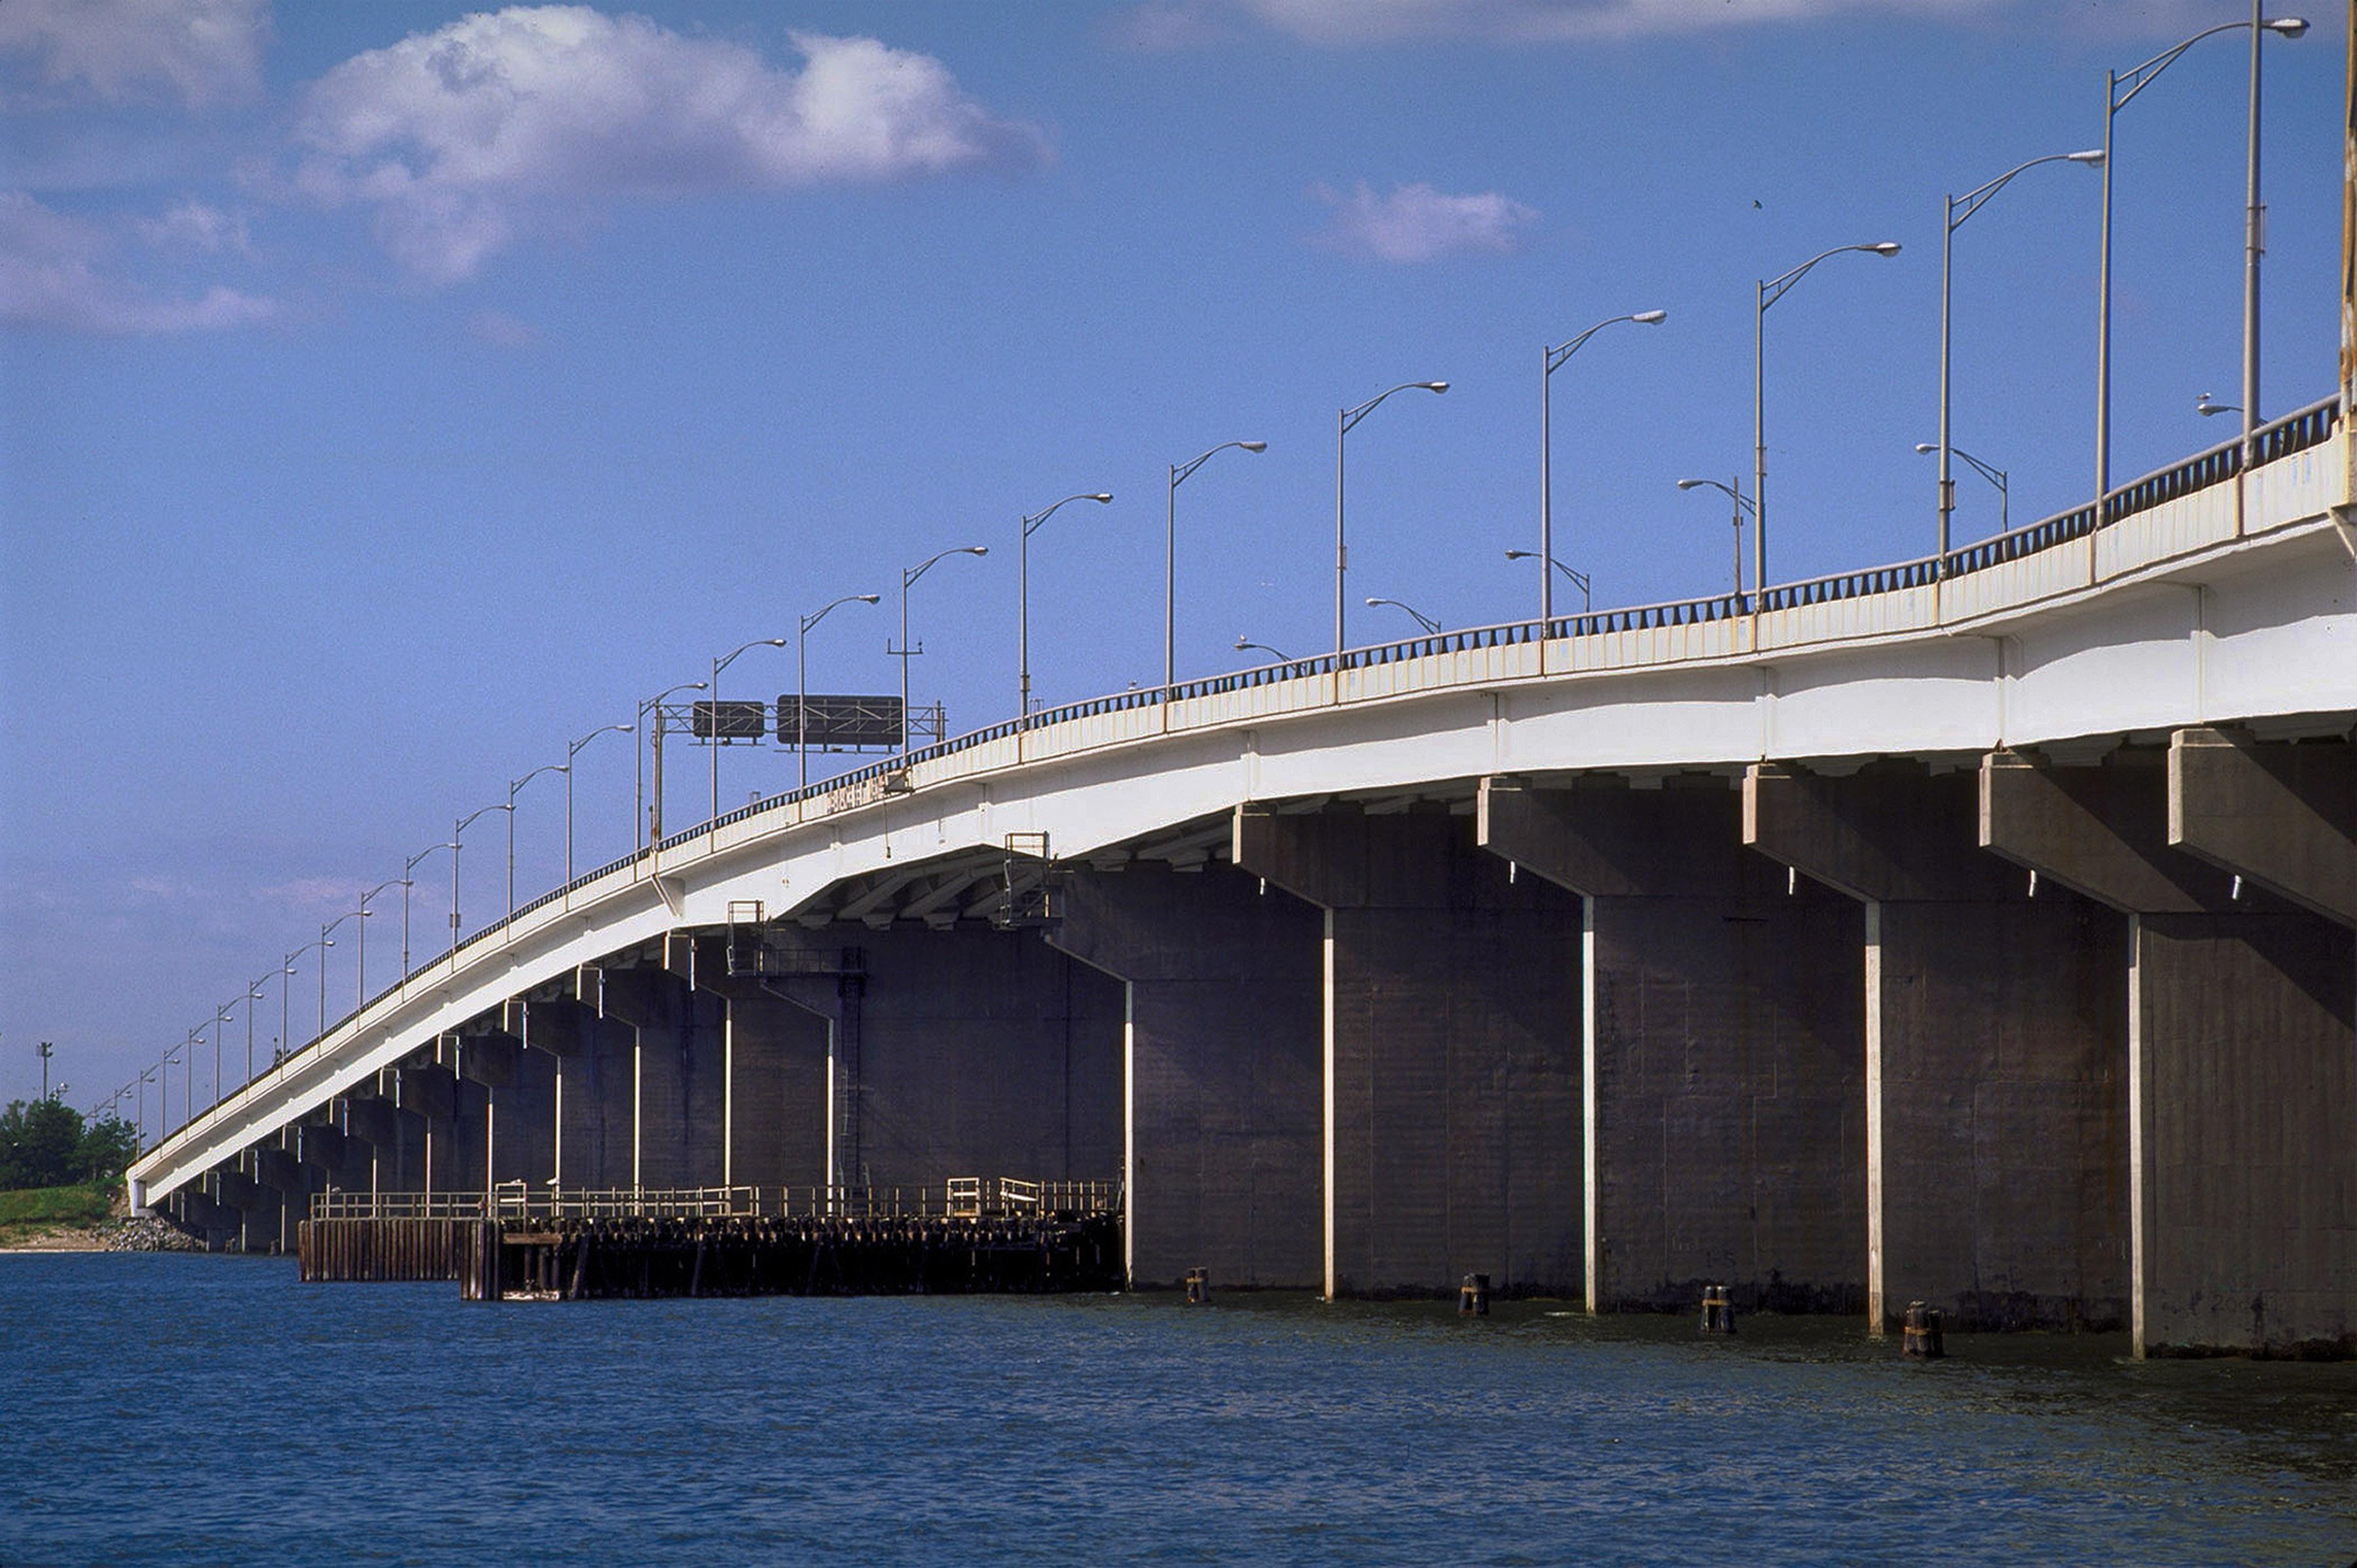 A bridge with traffic signs and streetlights visible stretches across a body of water, with blue sky and clouds overhead.